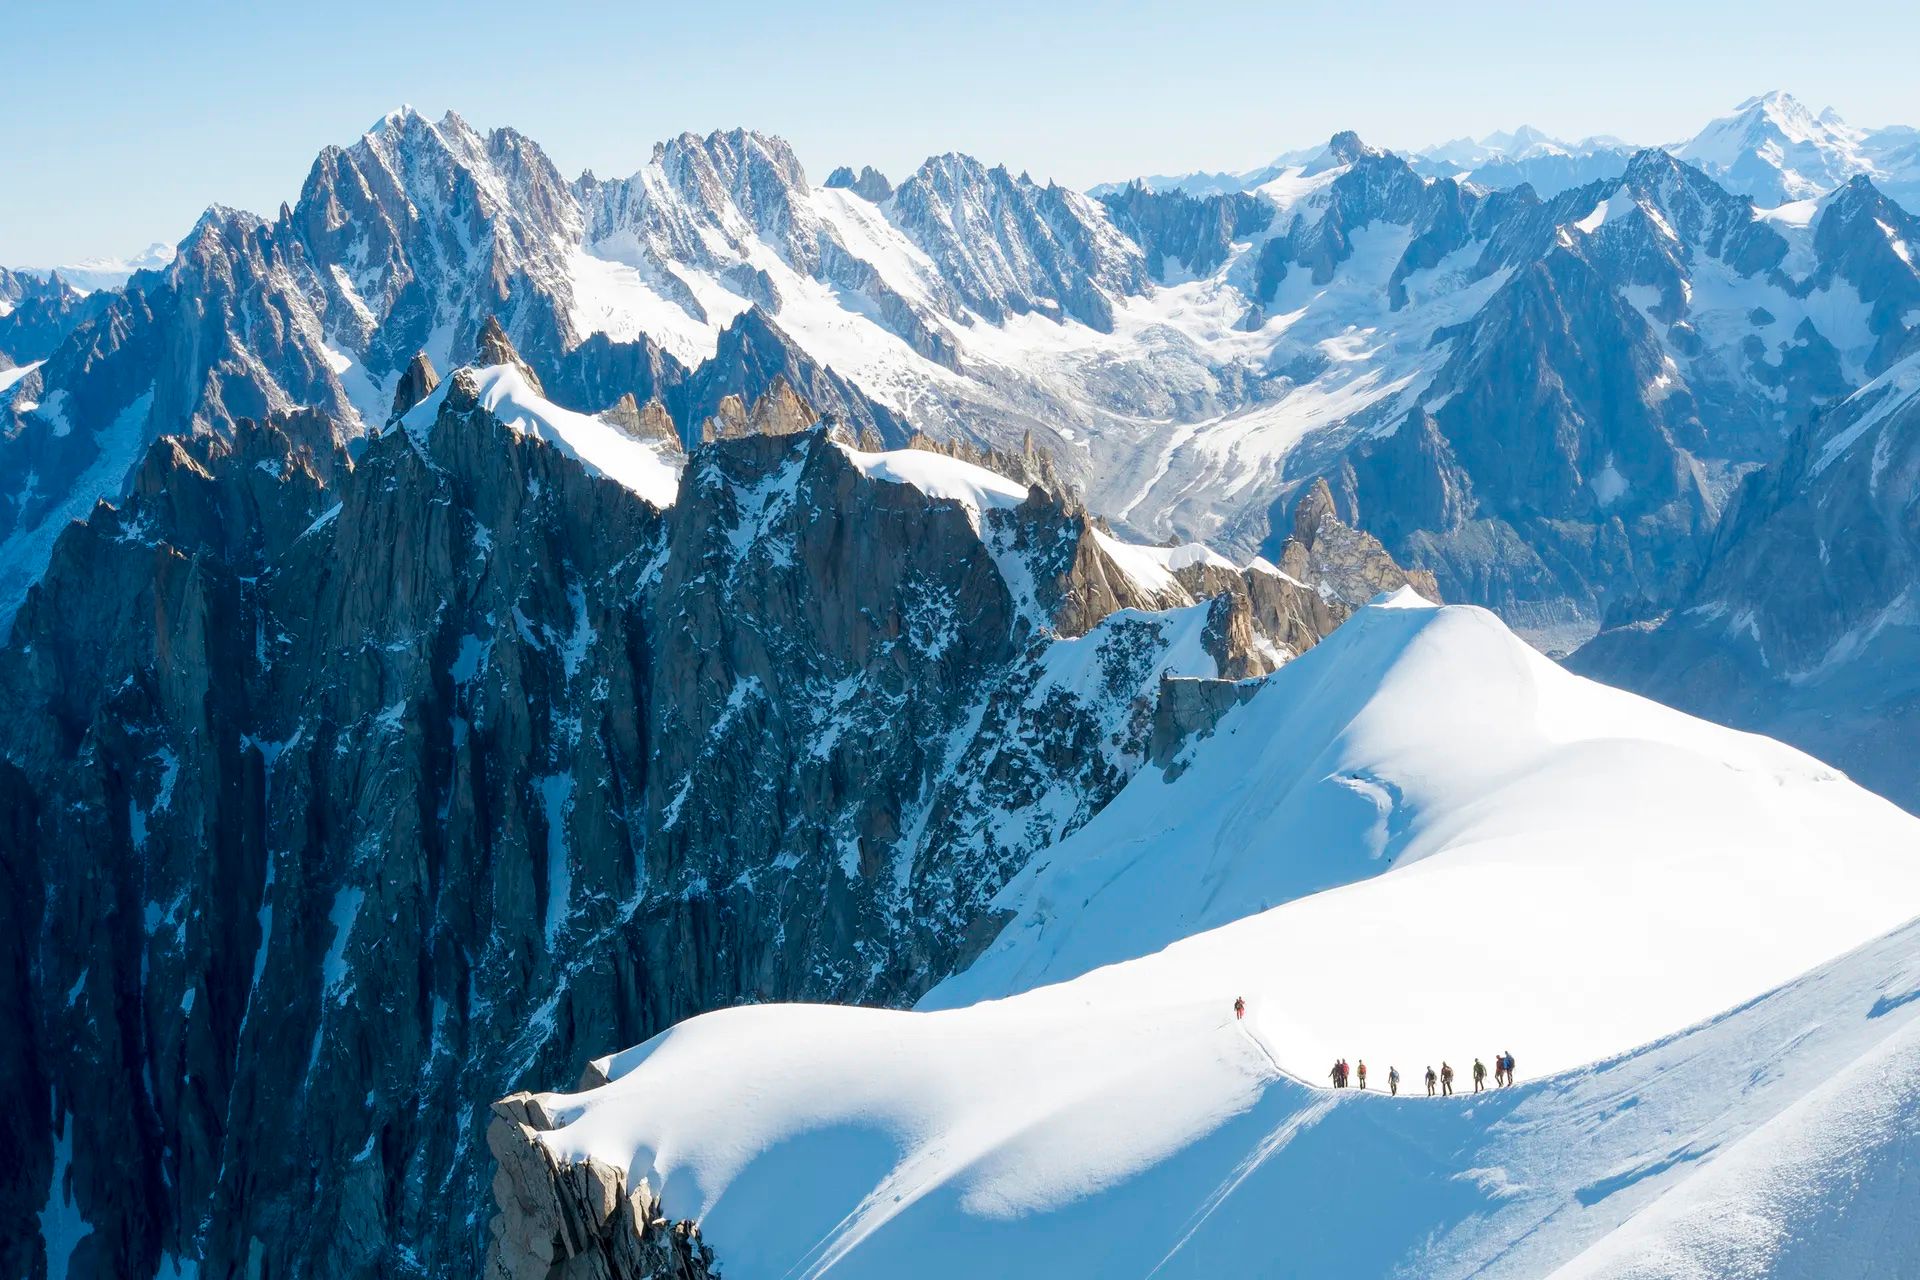 Climbers on Mont Blanc, the highest mountain in Western Europe.